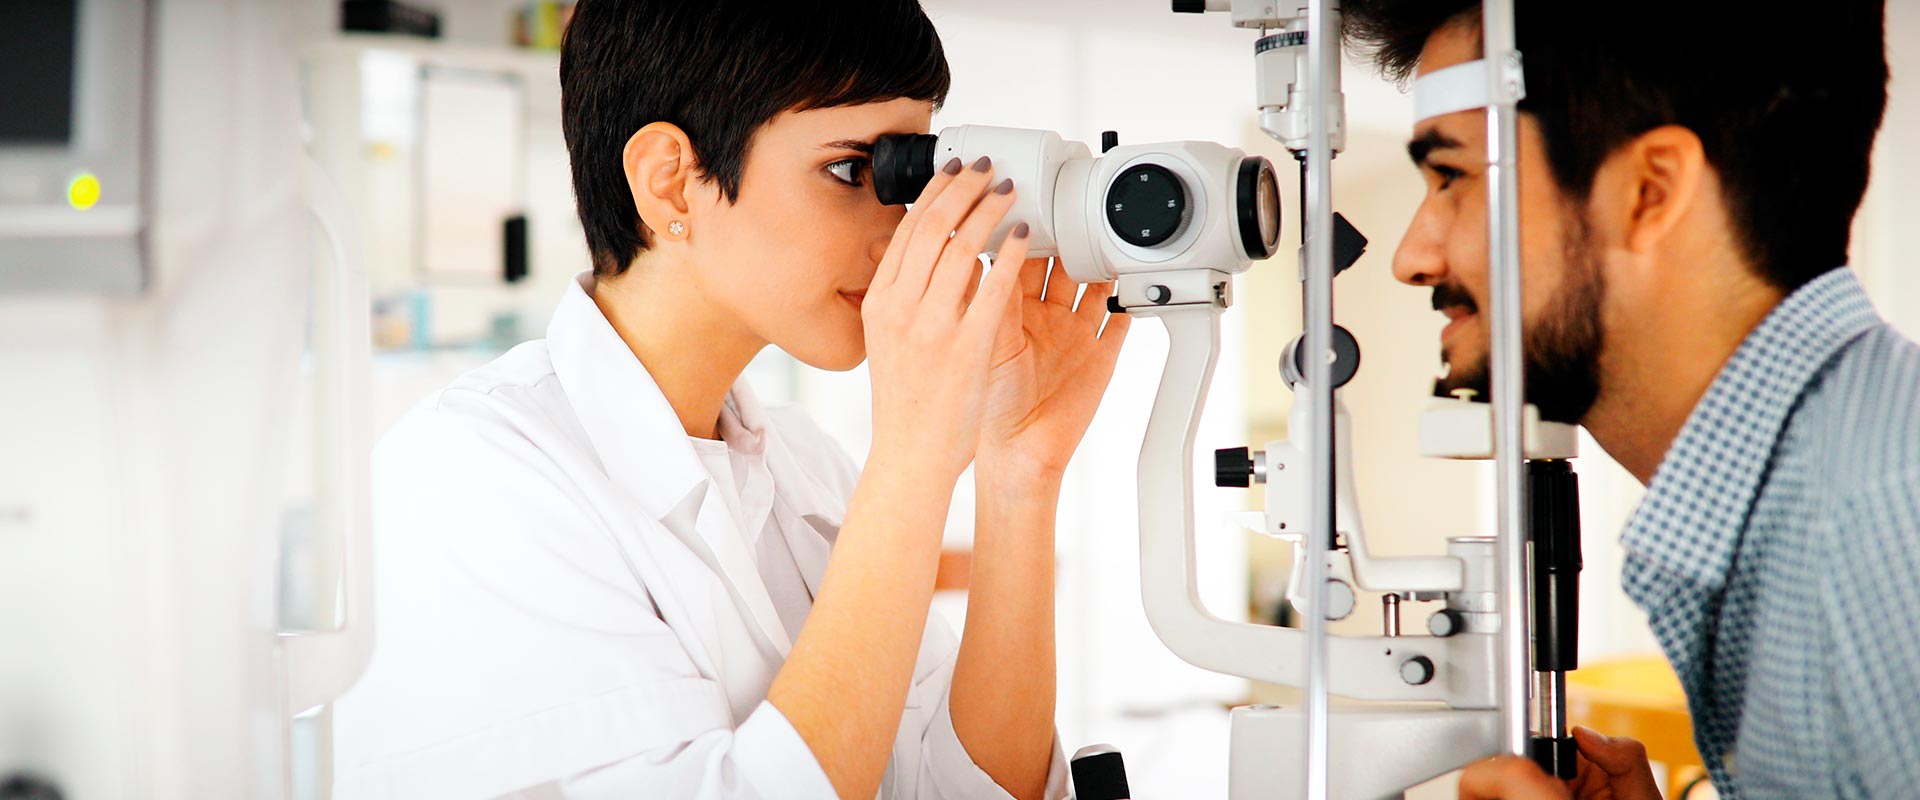 Can you drive after a slit lamp exam?